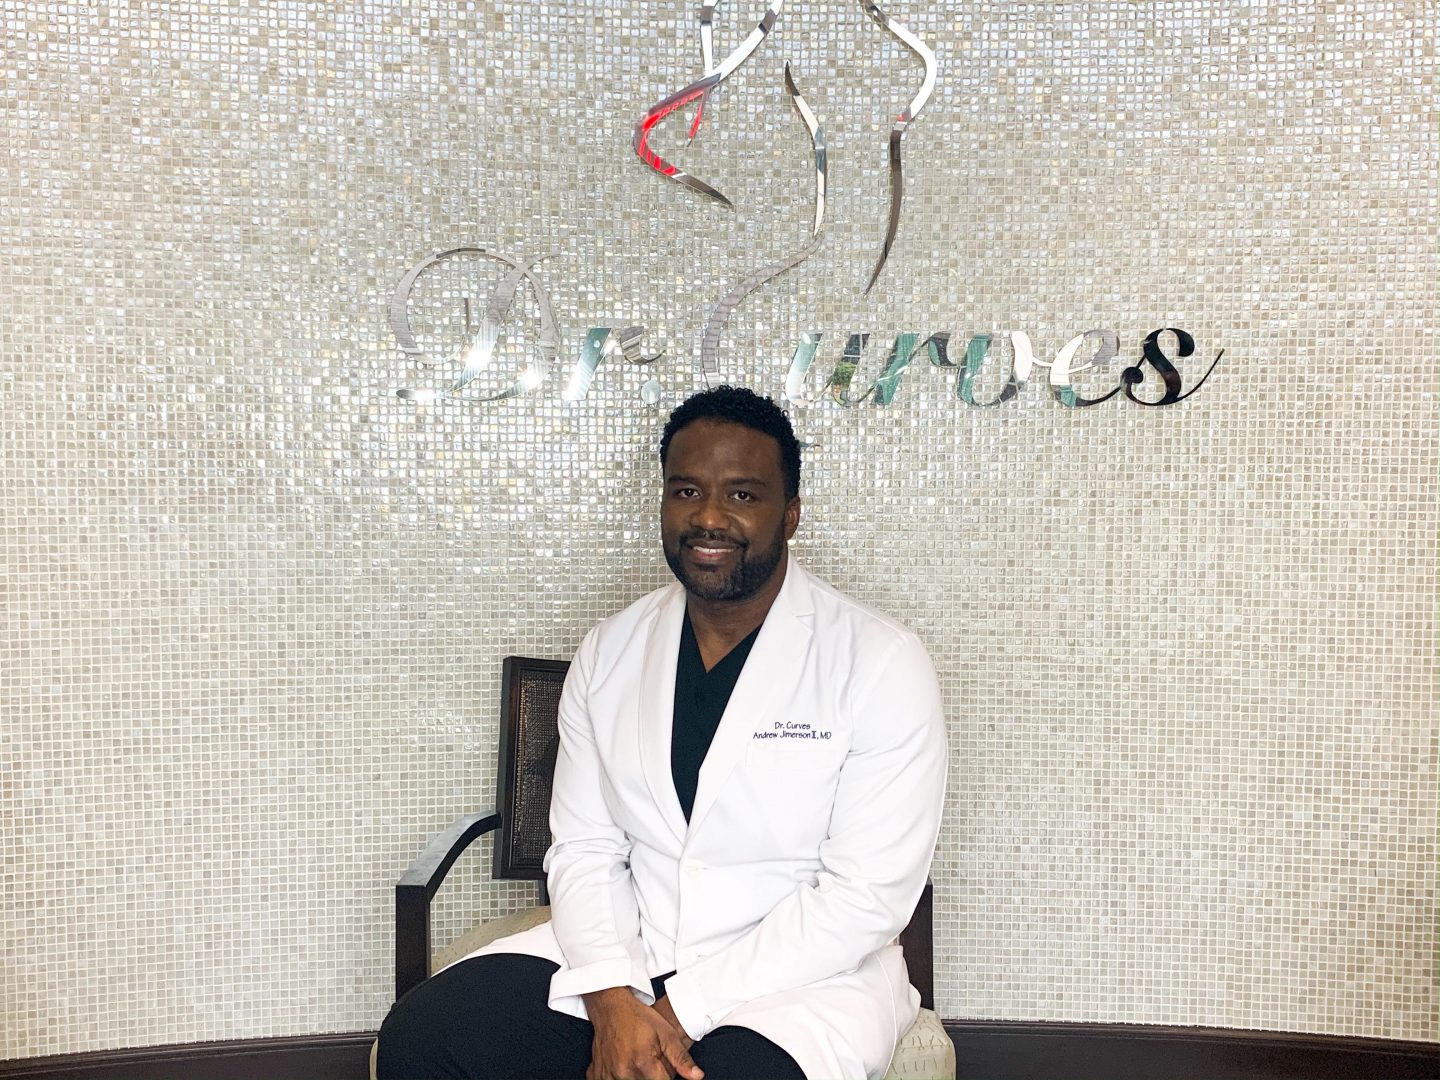 Atlanta plastic surgeon Dr. Curves shares what he loves